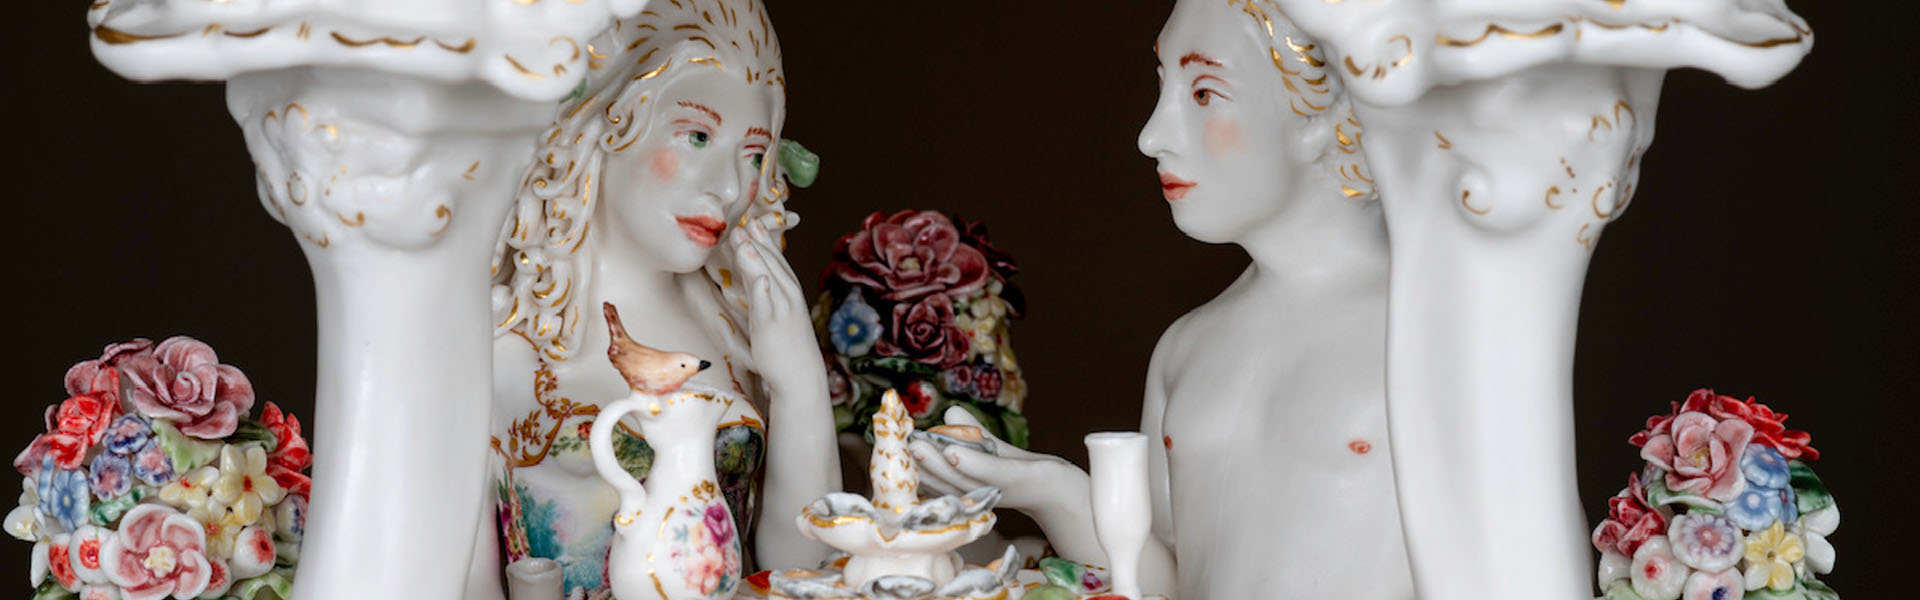 Image of two white porcelain figurines at a dining table surrounded by flowers